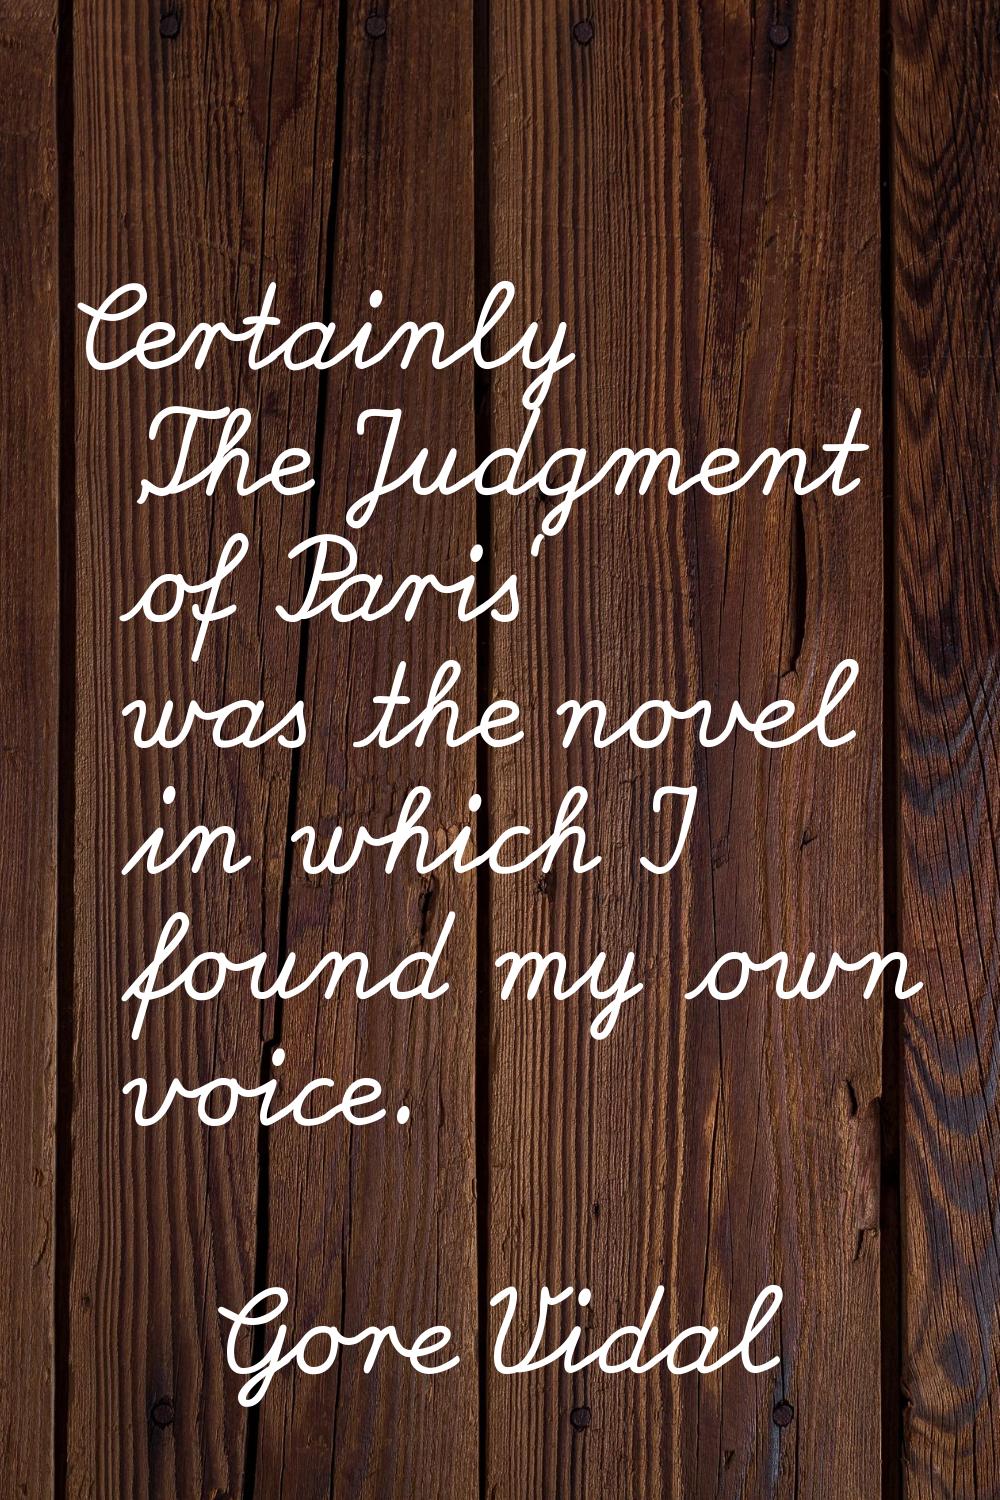 Certainly 'The Judgment of Paris' was the novel in which I found my own voice.